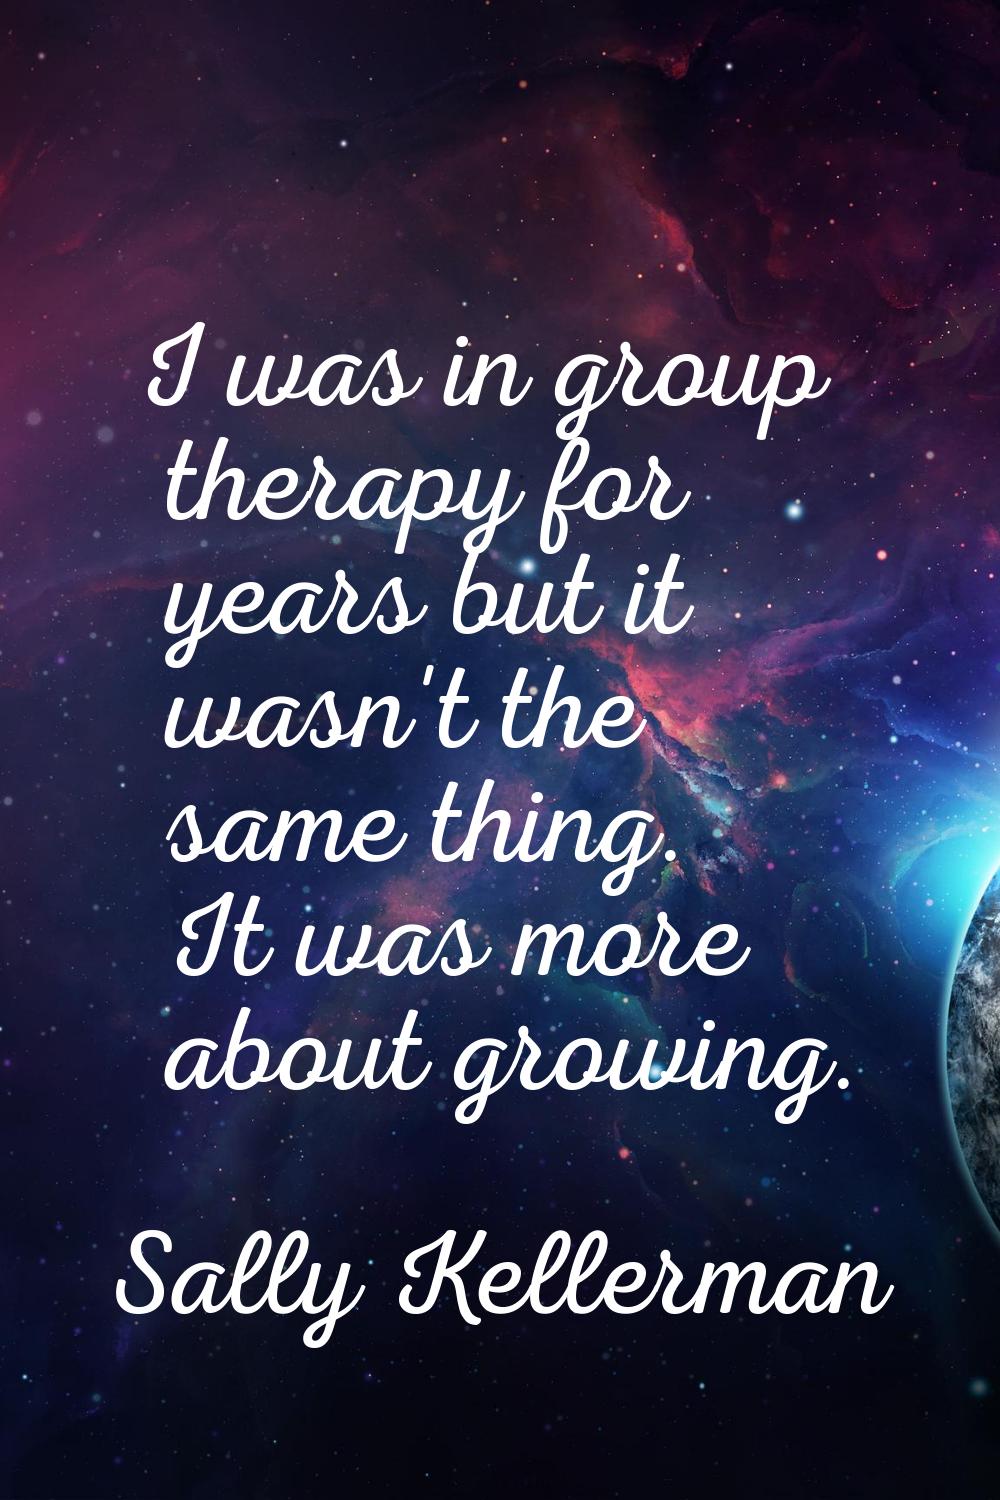 I was in group therapy for years but it wasn't the same thing. It was more about growing.